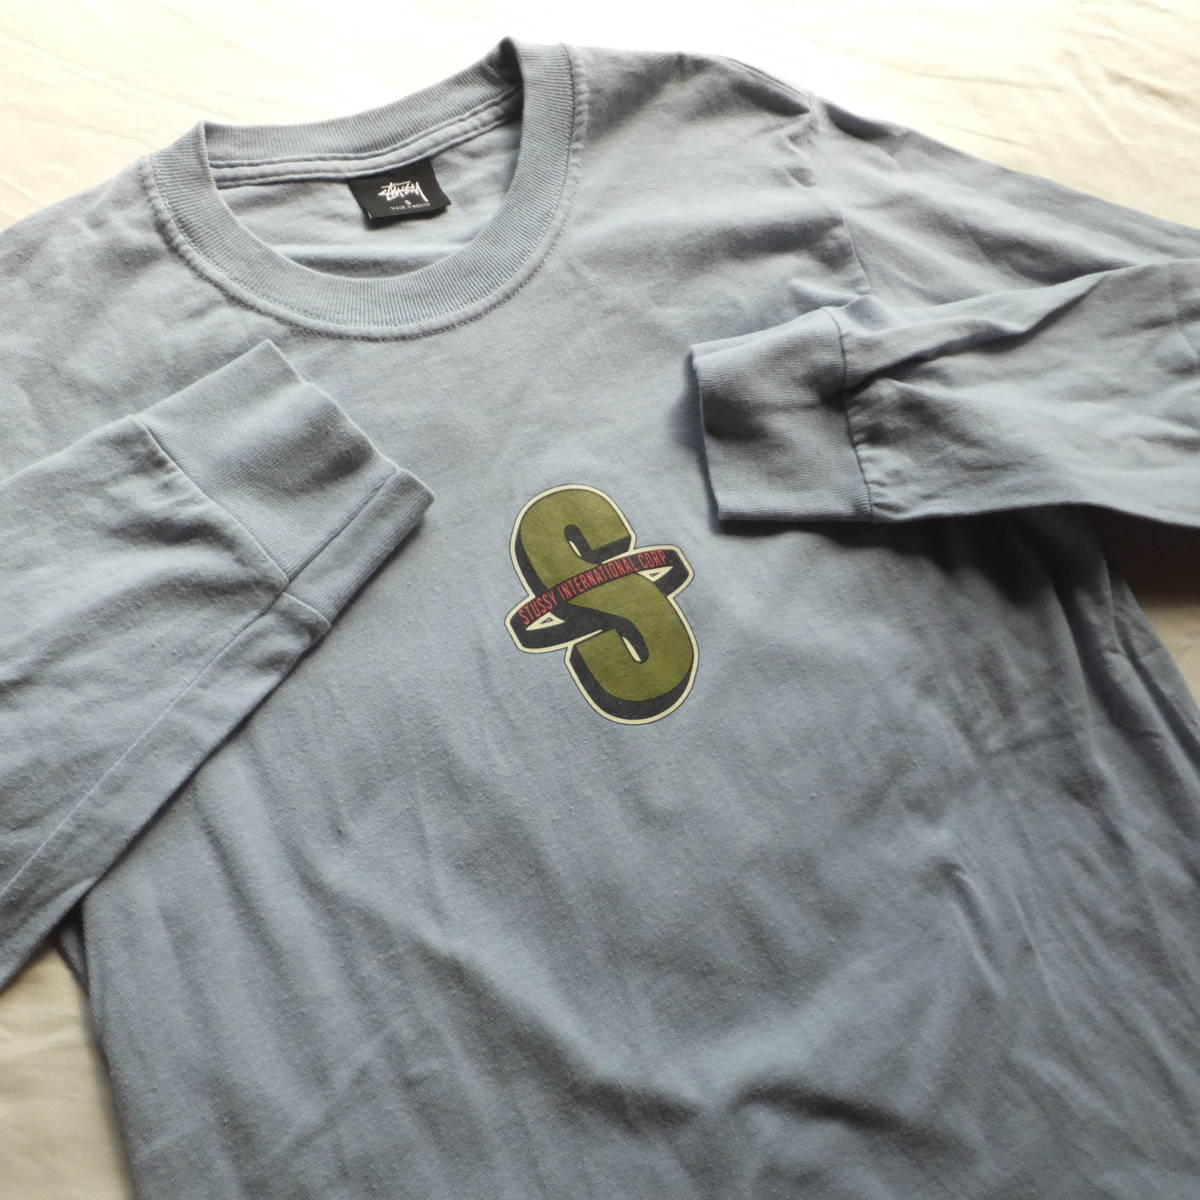 STUSSY Stussy S big Logo ( back print ) long sleeve T shirt S size long Tee light blue USED old clothes 